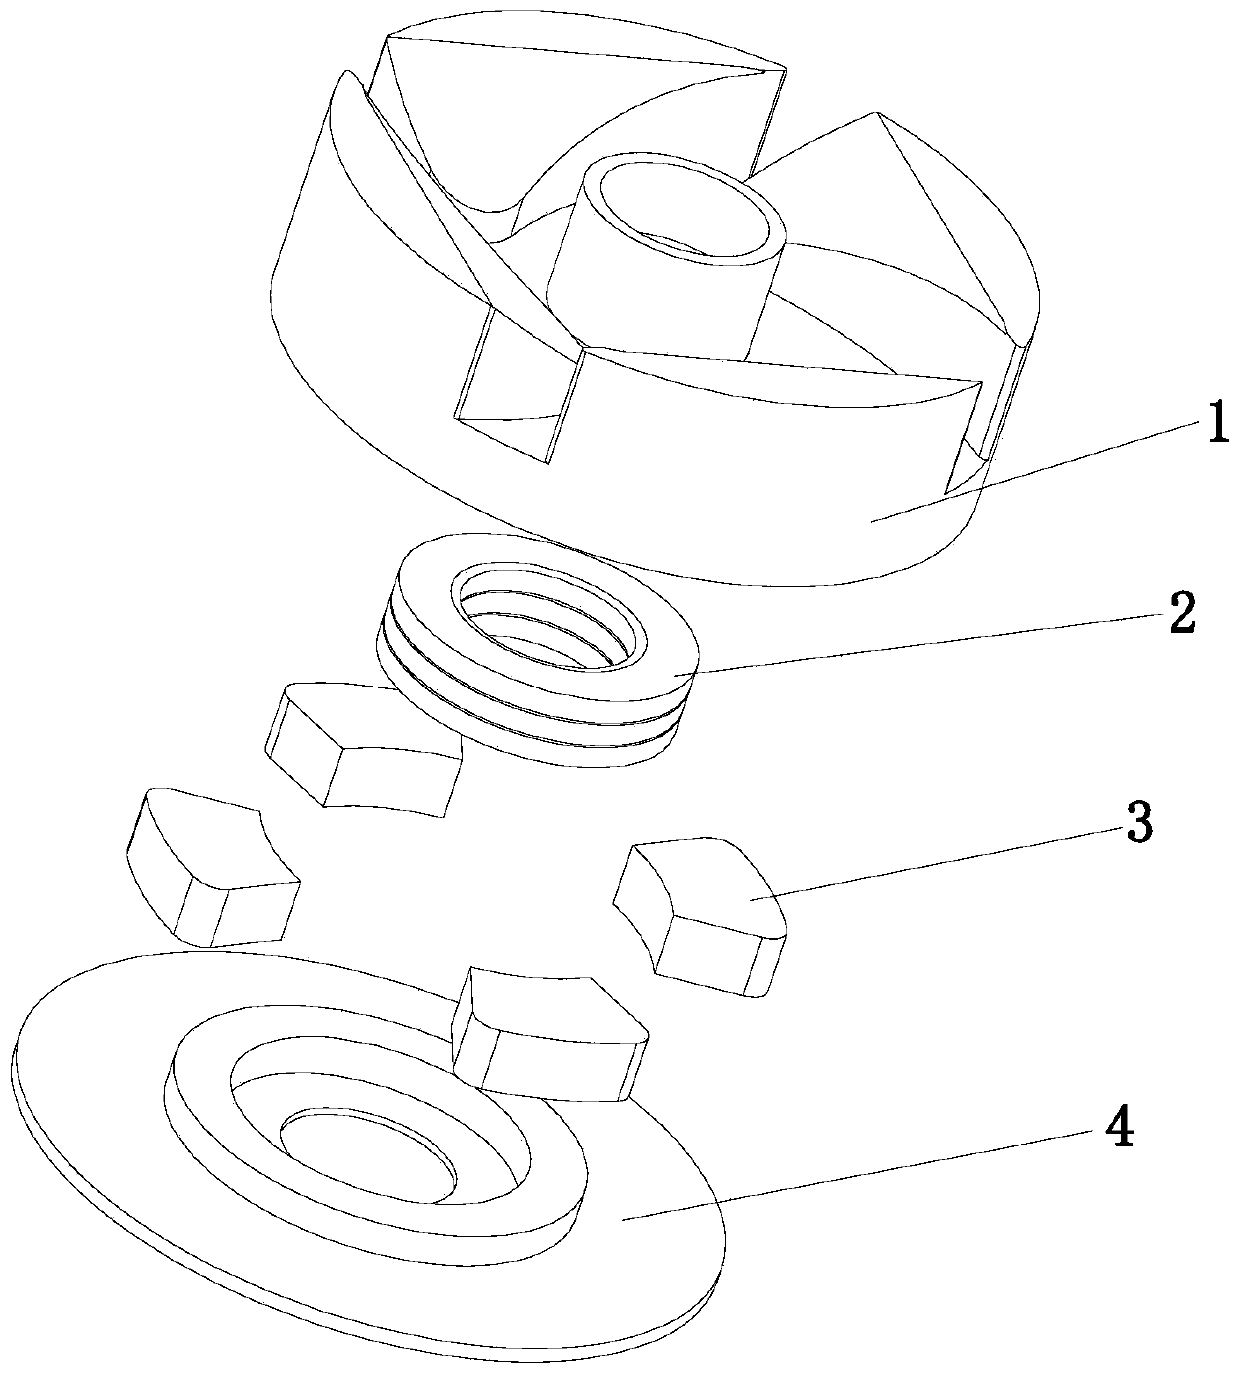 Production process of centrifugal blood pump rotor